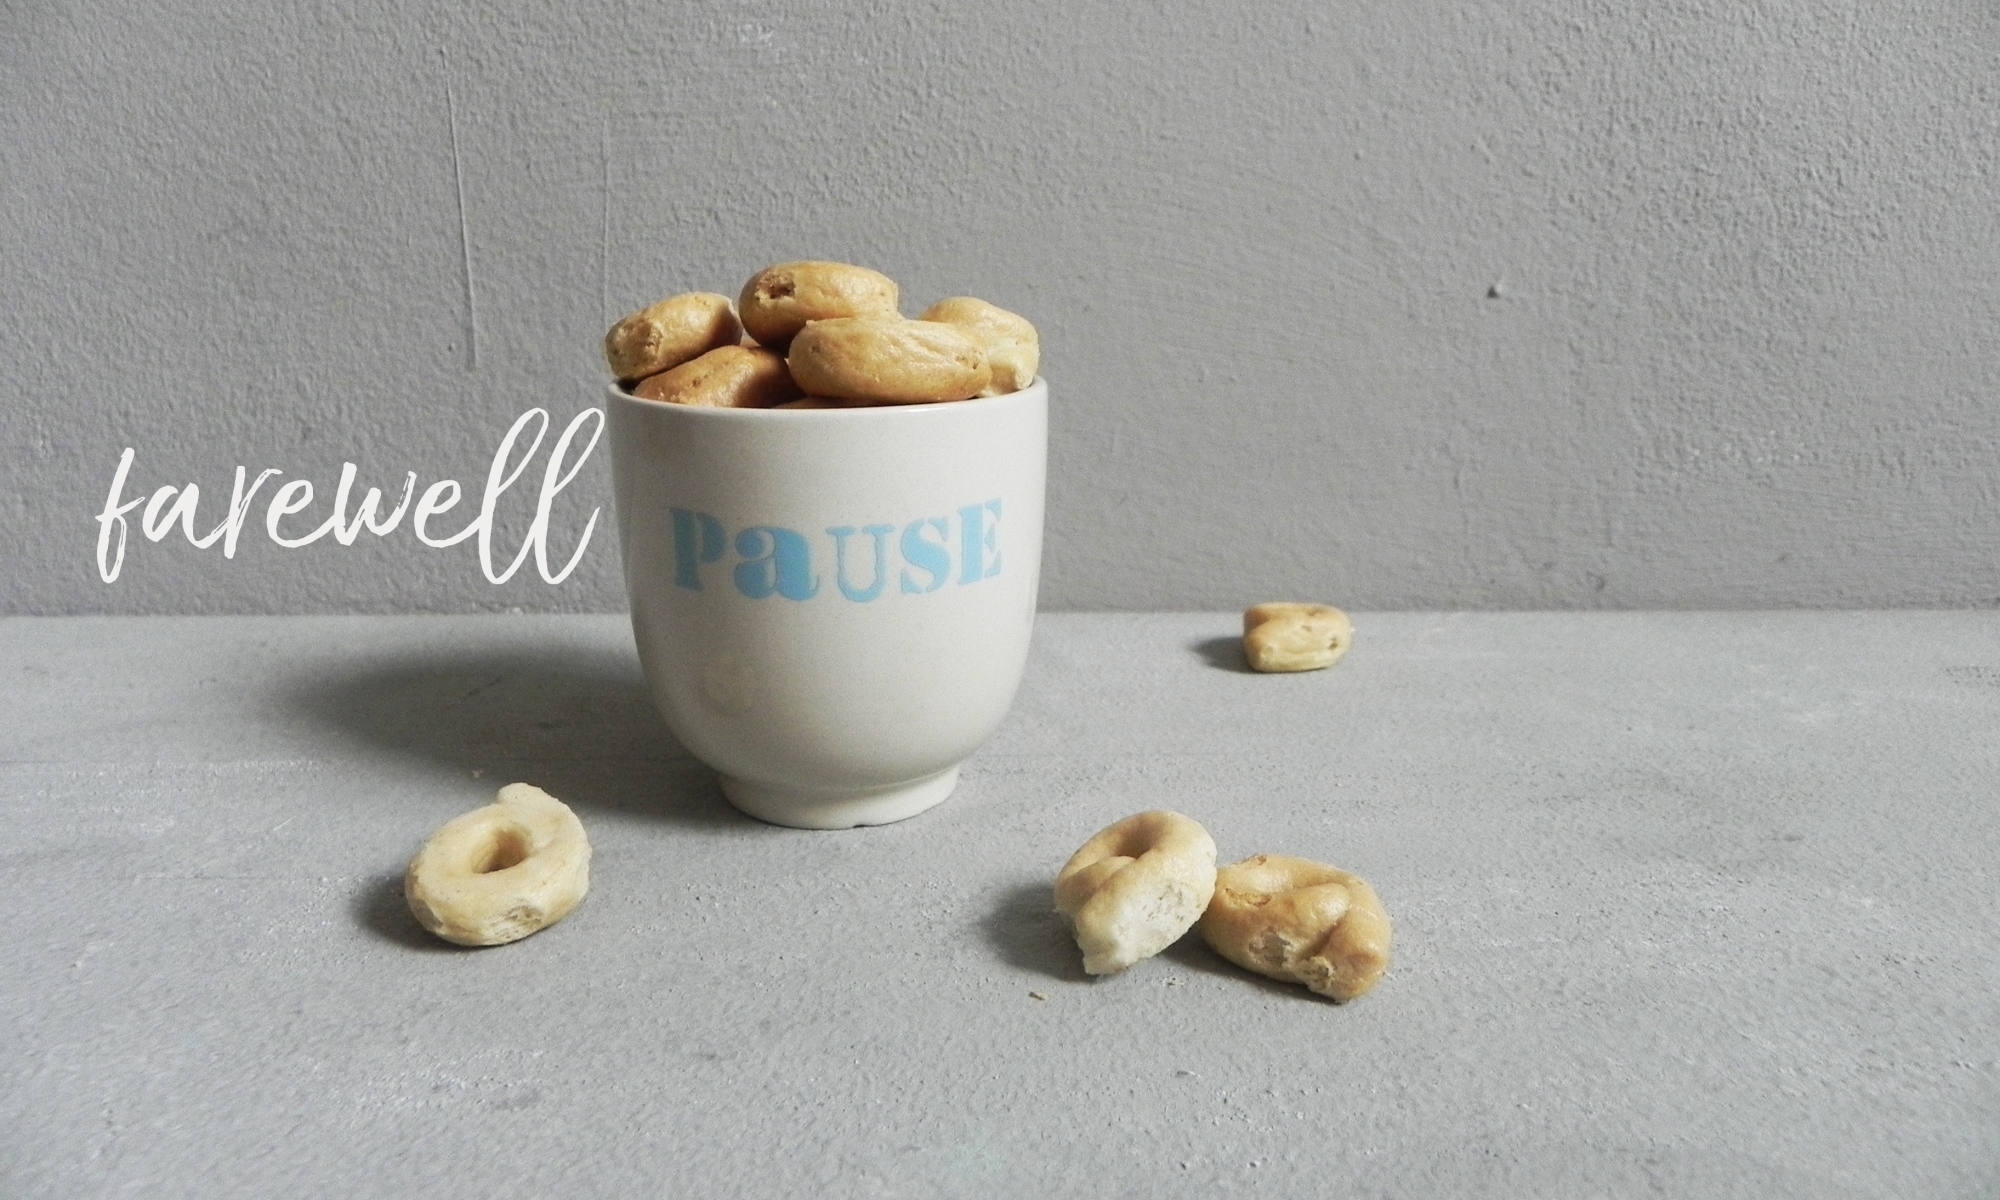 farewell pause, cup filled with Taralli